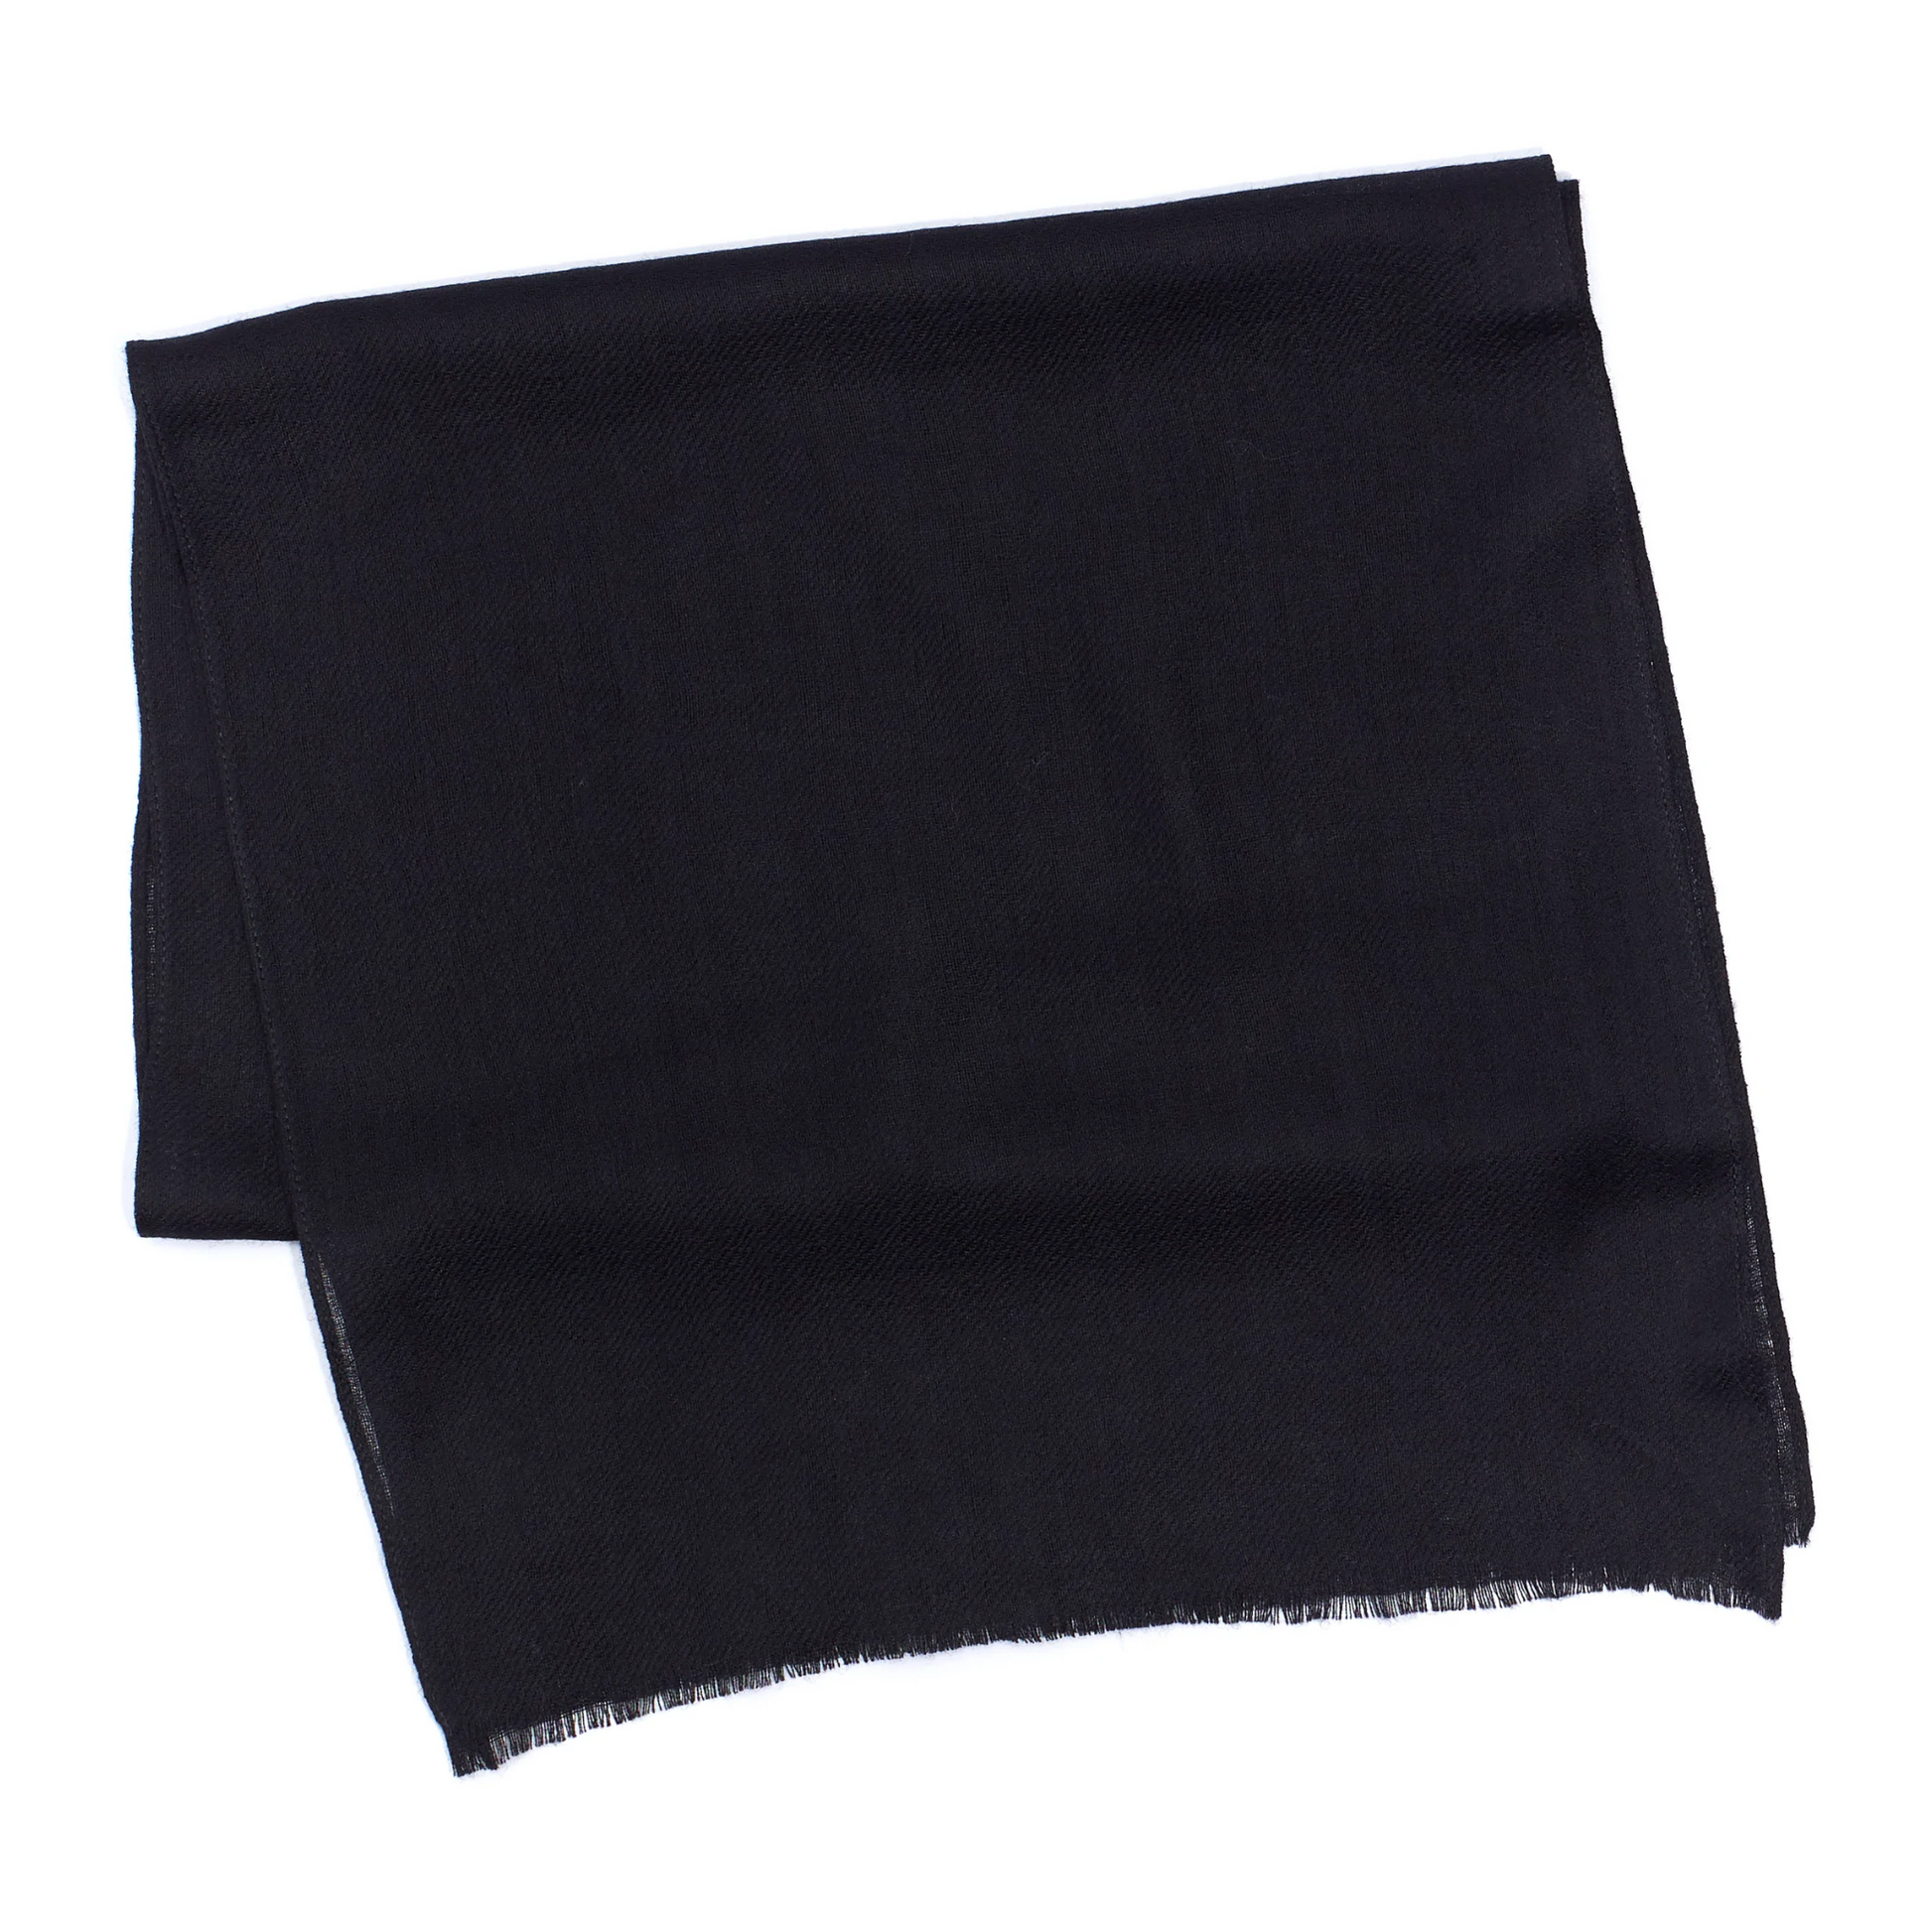 A black scarf is pictured folded and has a natural hem.